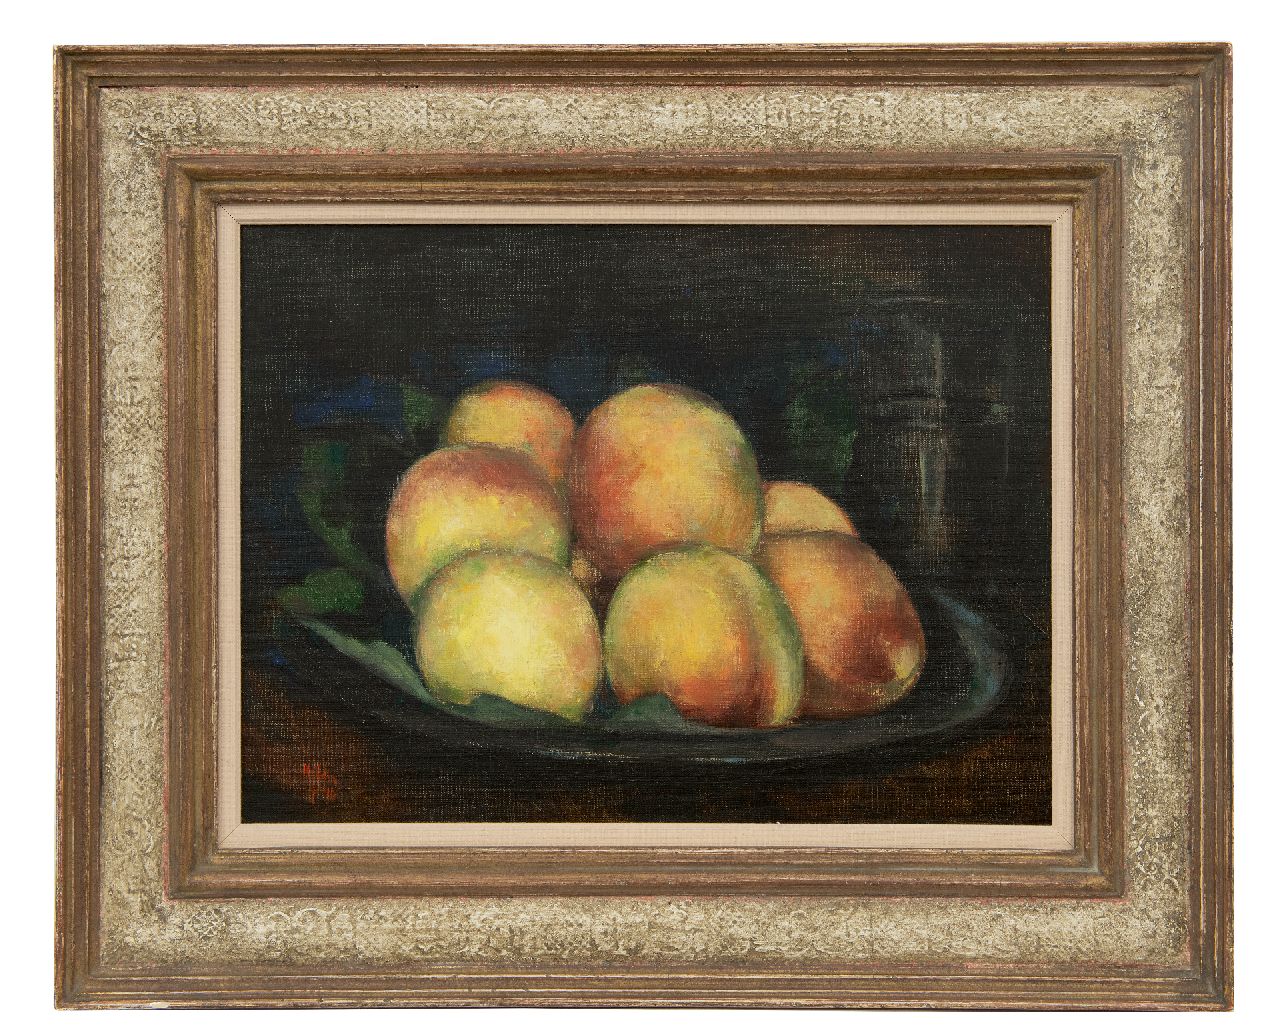 Kelder A.B.  | Antonius Bernardus 'Toon' Kelder | Paintings offered for sale | Peaches in a tin dish, oil on canvas 32.3 x 43.3 cm, signed l.l. and dated '40